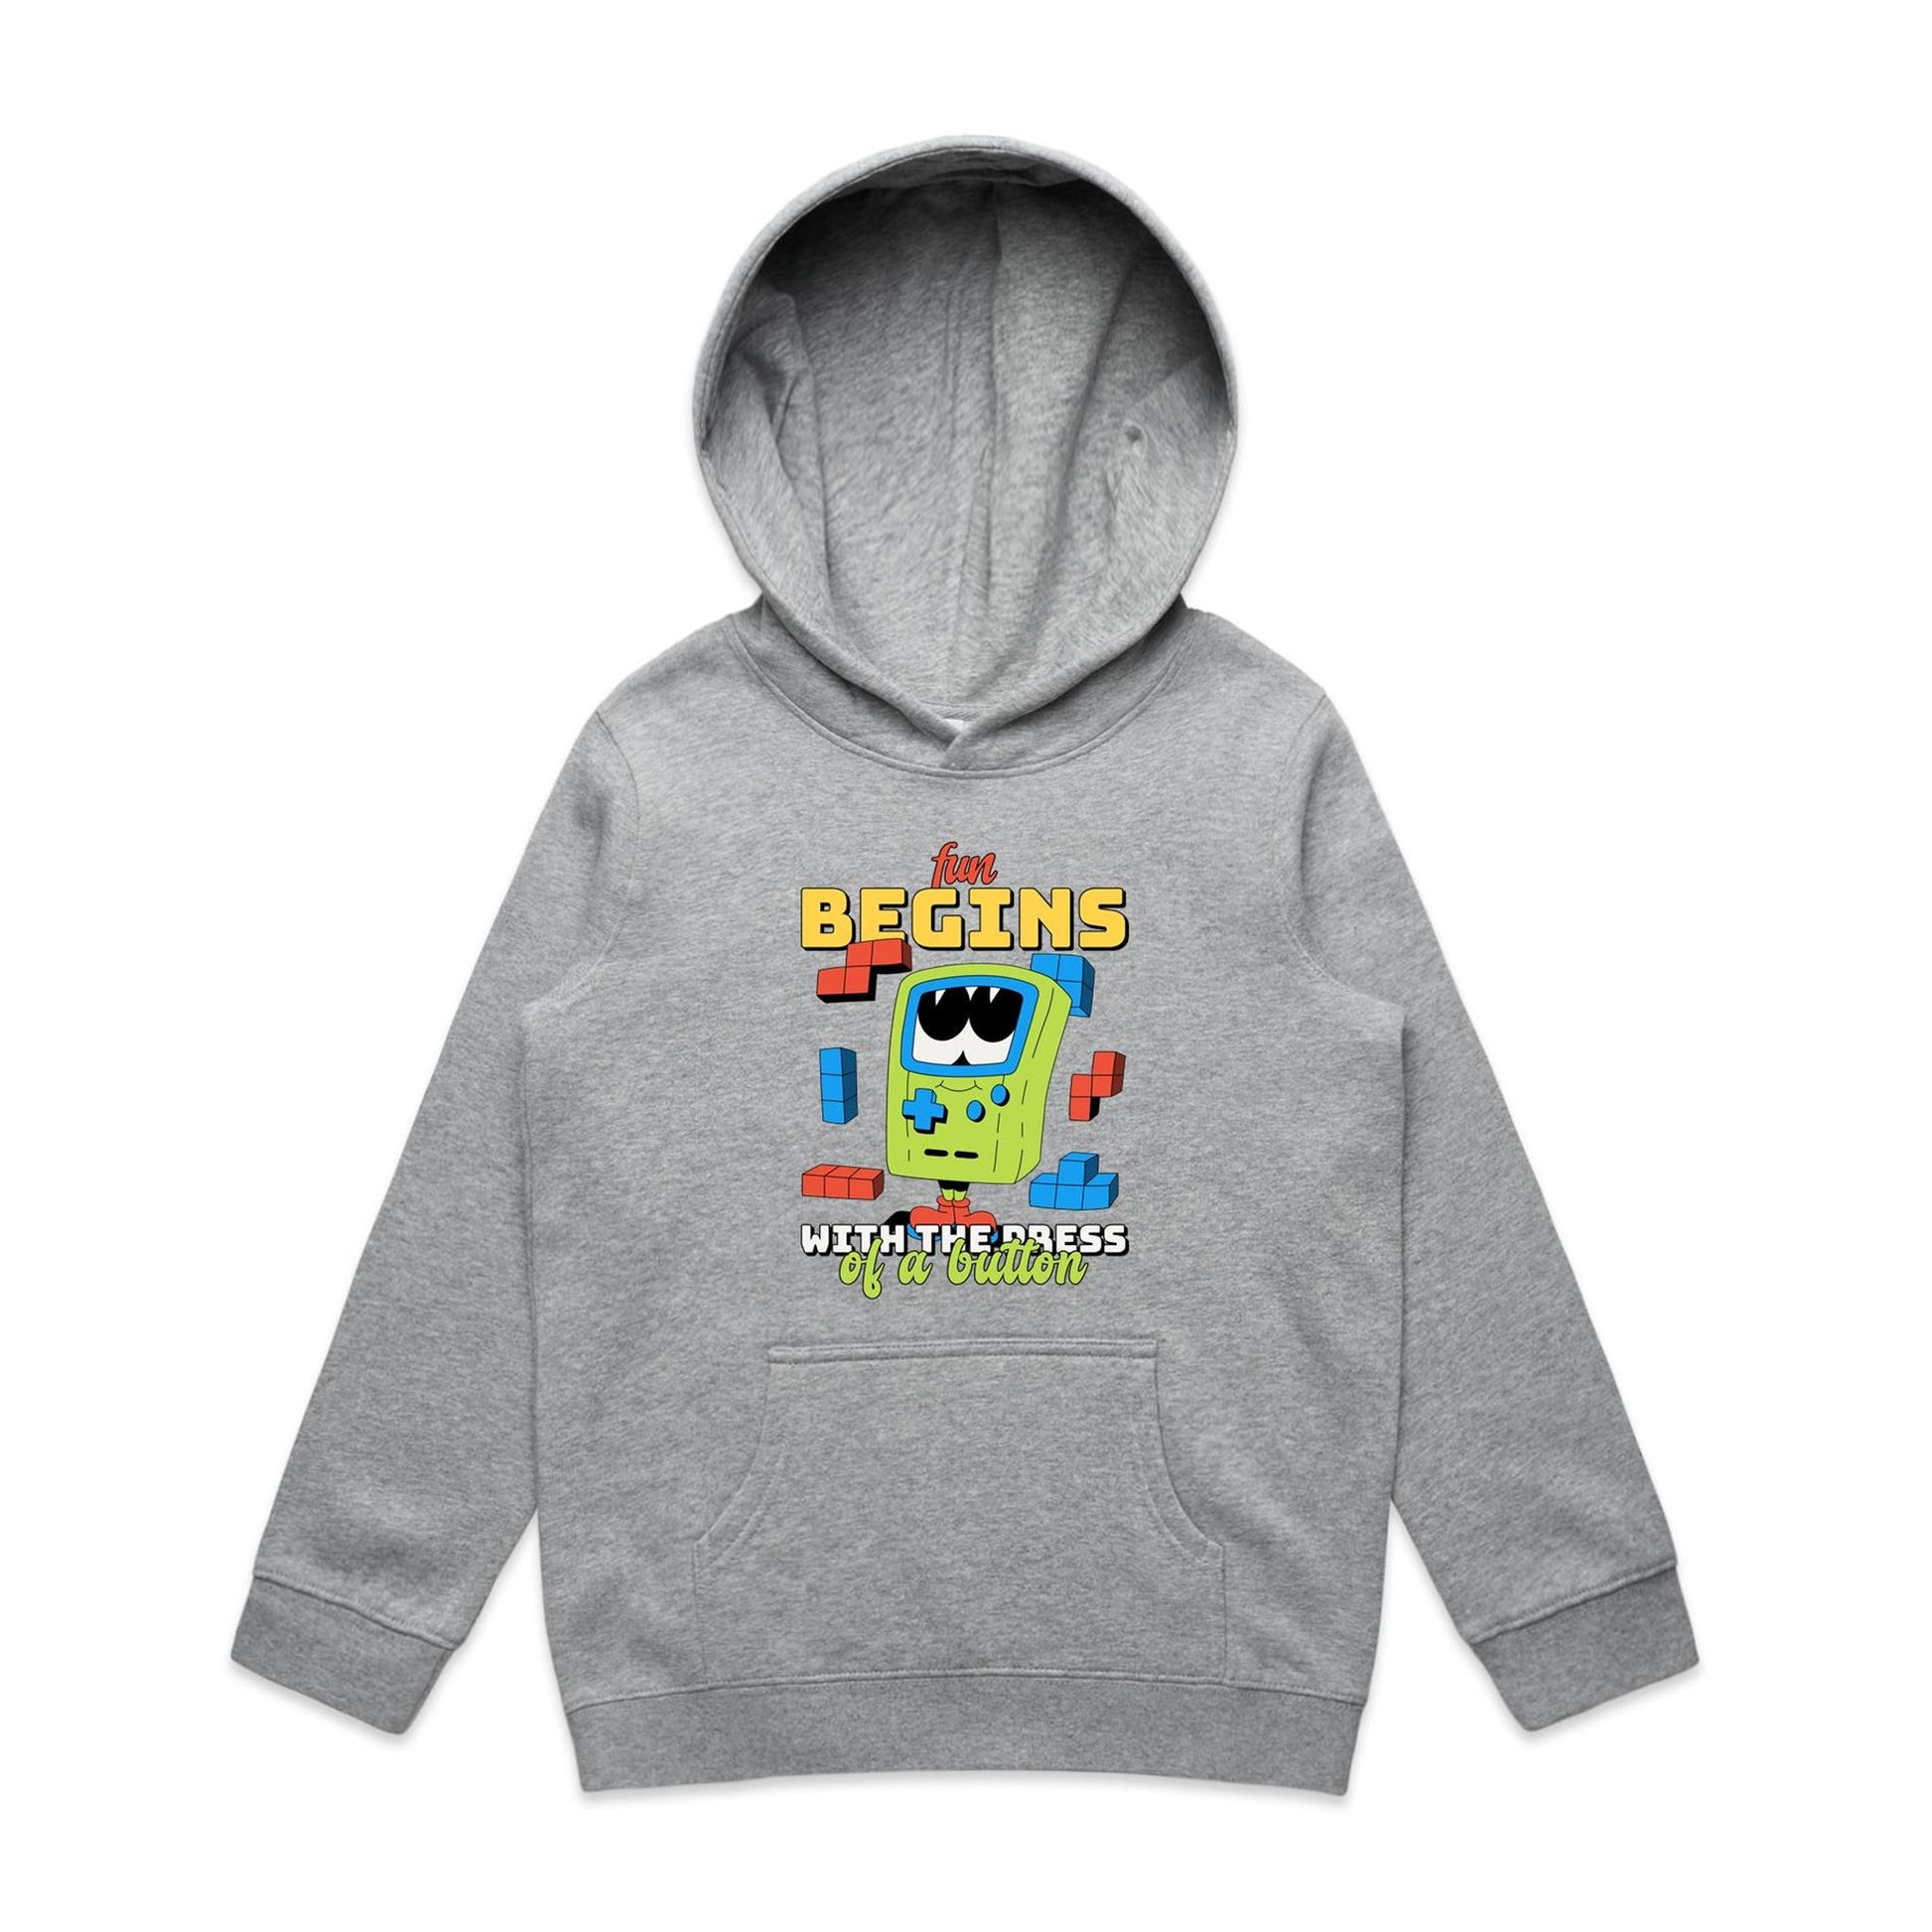 Fun Begins With The Press Of A Button, Games - Youth Supply Hood Grey Marle Kids Hoodie Games